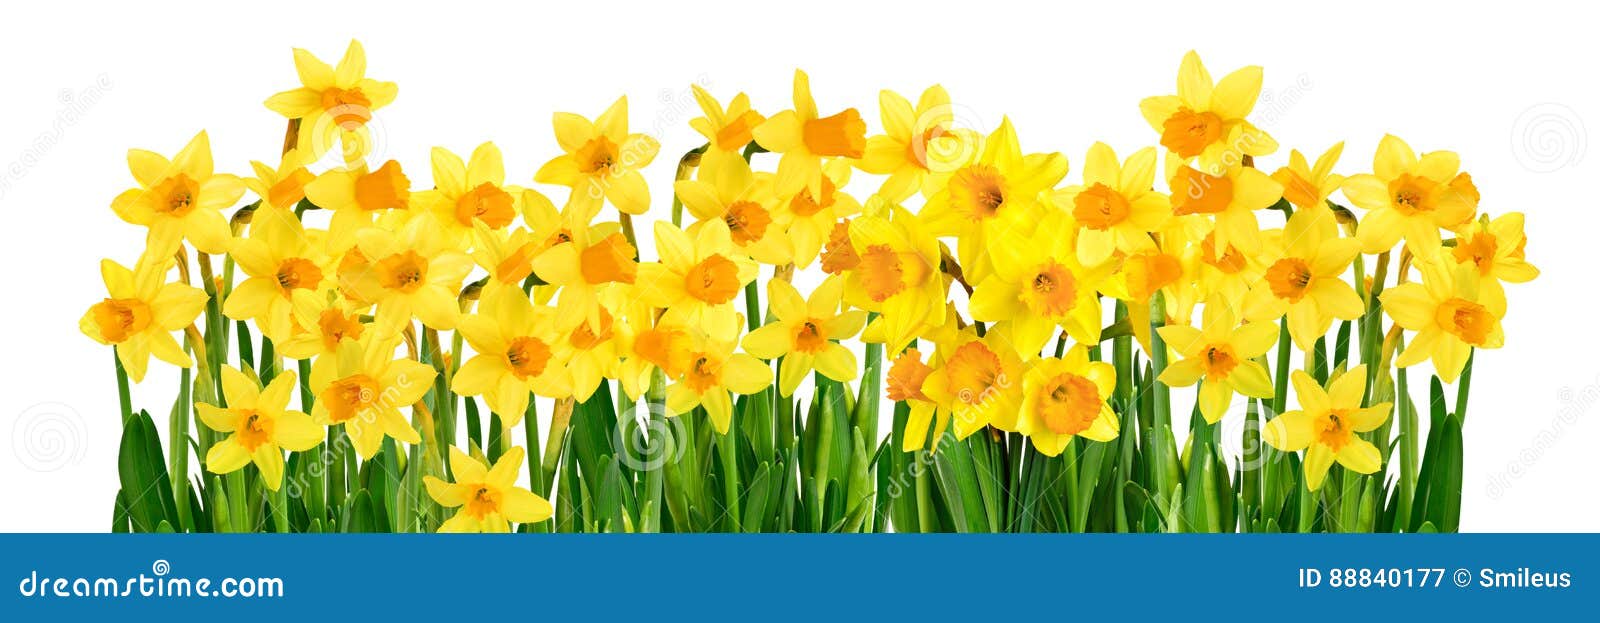 blossoming yellow daffodils  on white